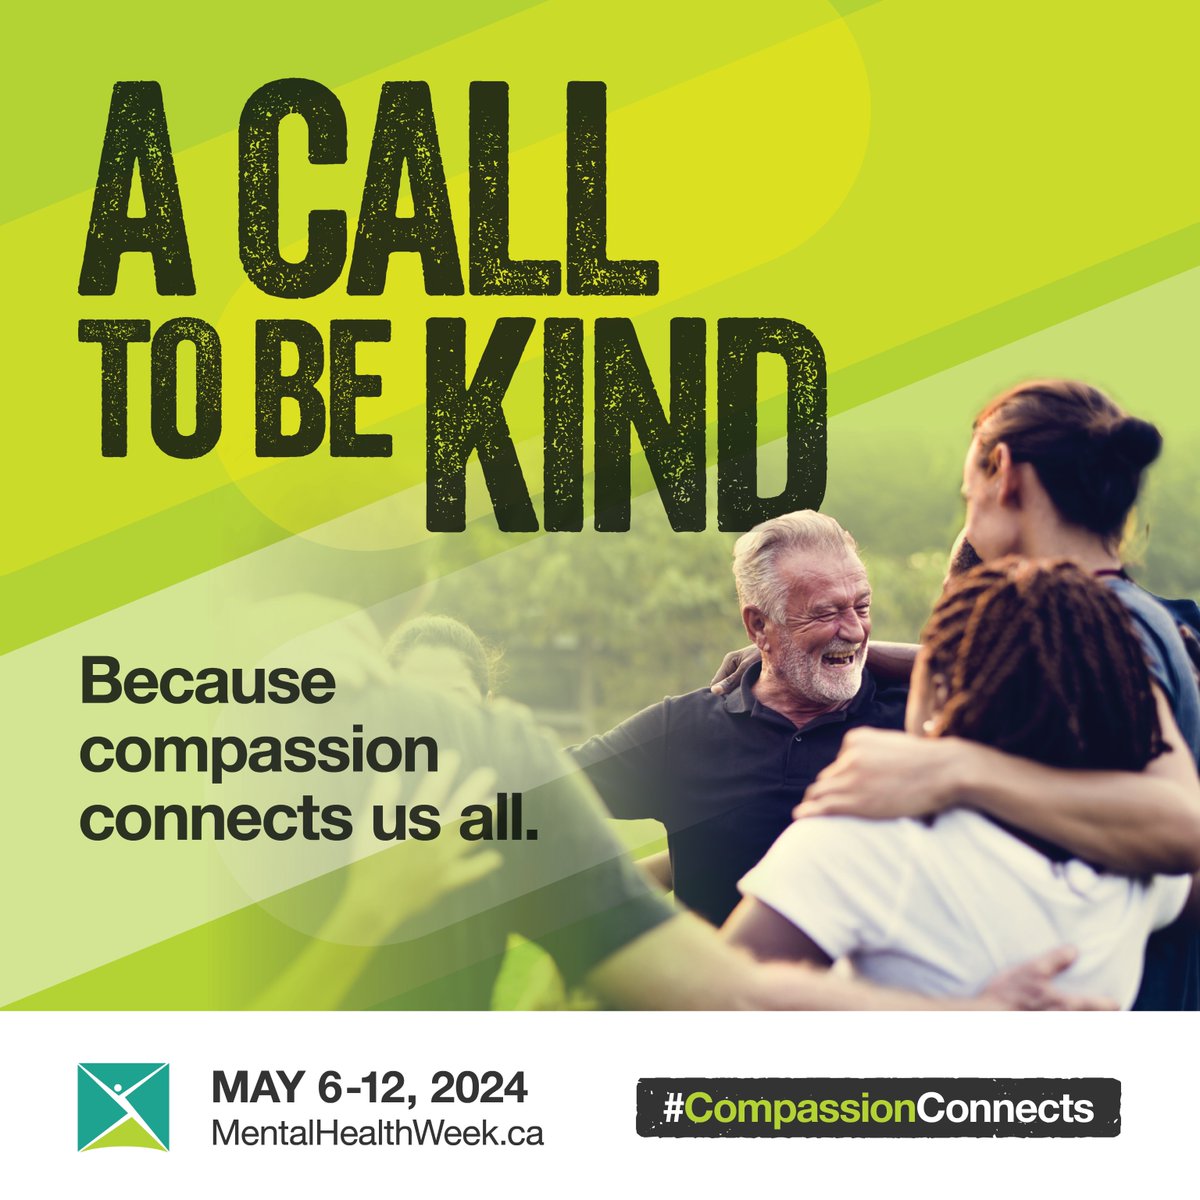 Compassion isn't just about being kind to others, it's about extending that same kindness to ourselves. Visit ow.ly/Nun350RxAXr to learn more. #MentalHealthWeek #CompassionConnects @CMHA_NTL